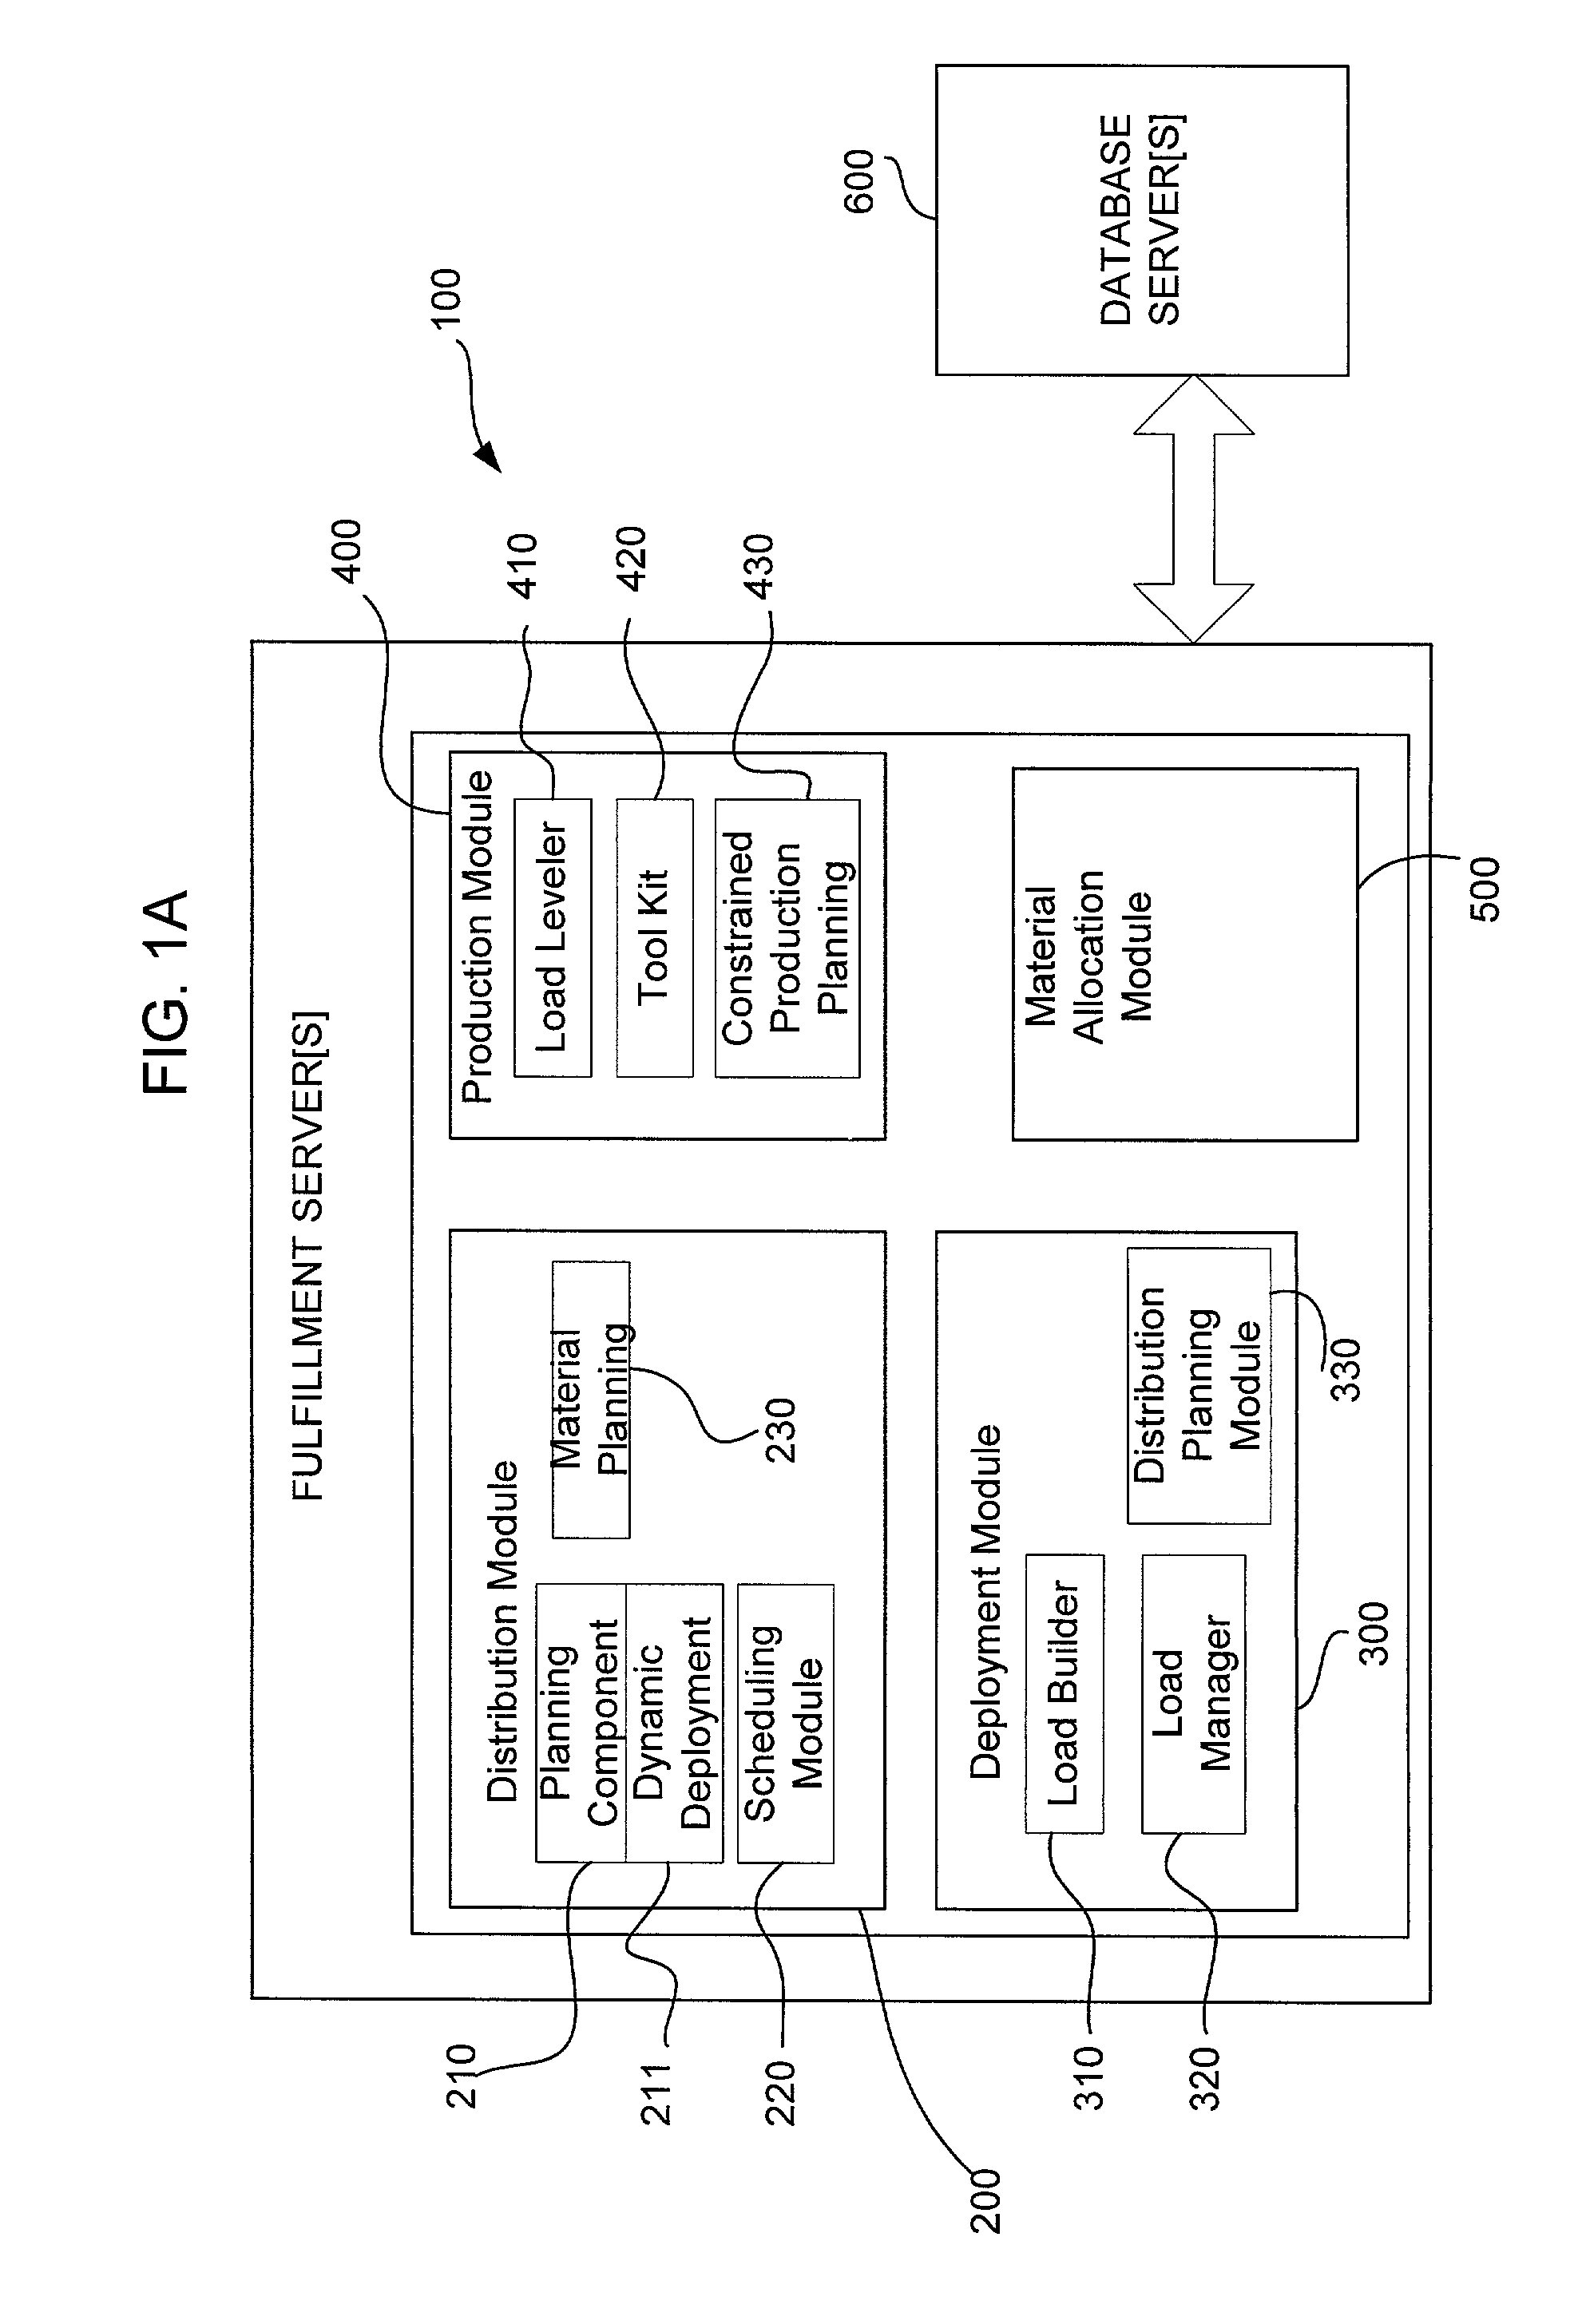 System and method for ensuring order fulfillment